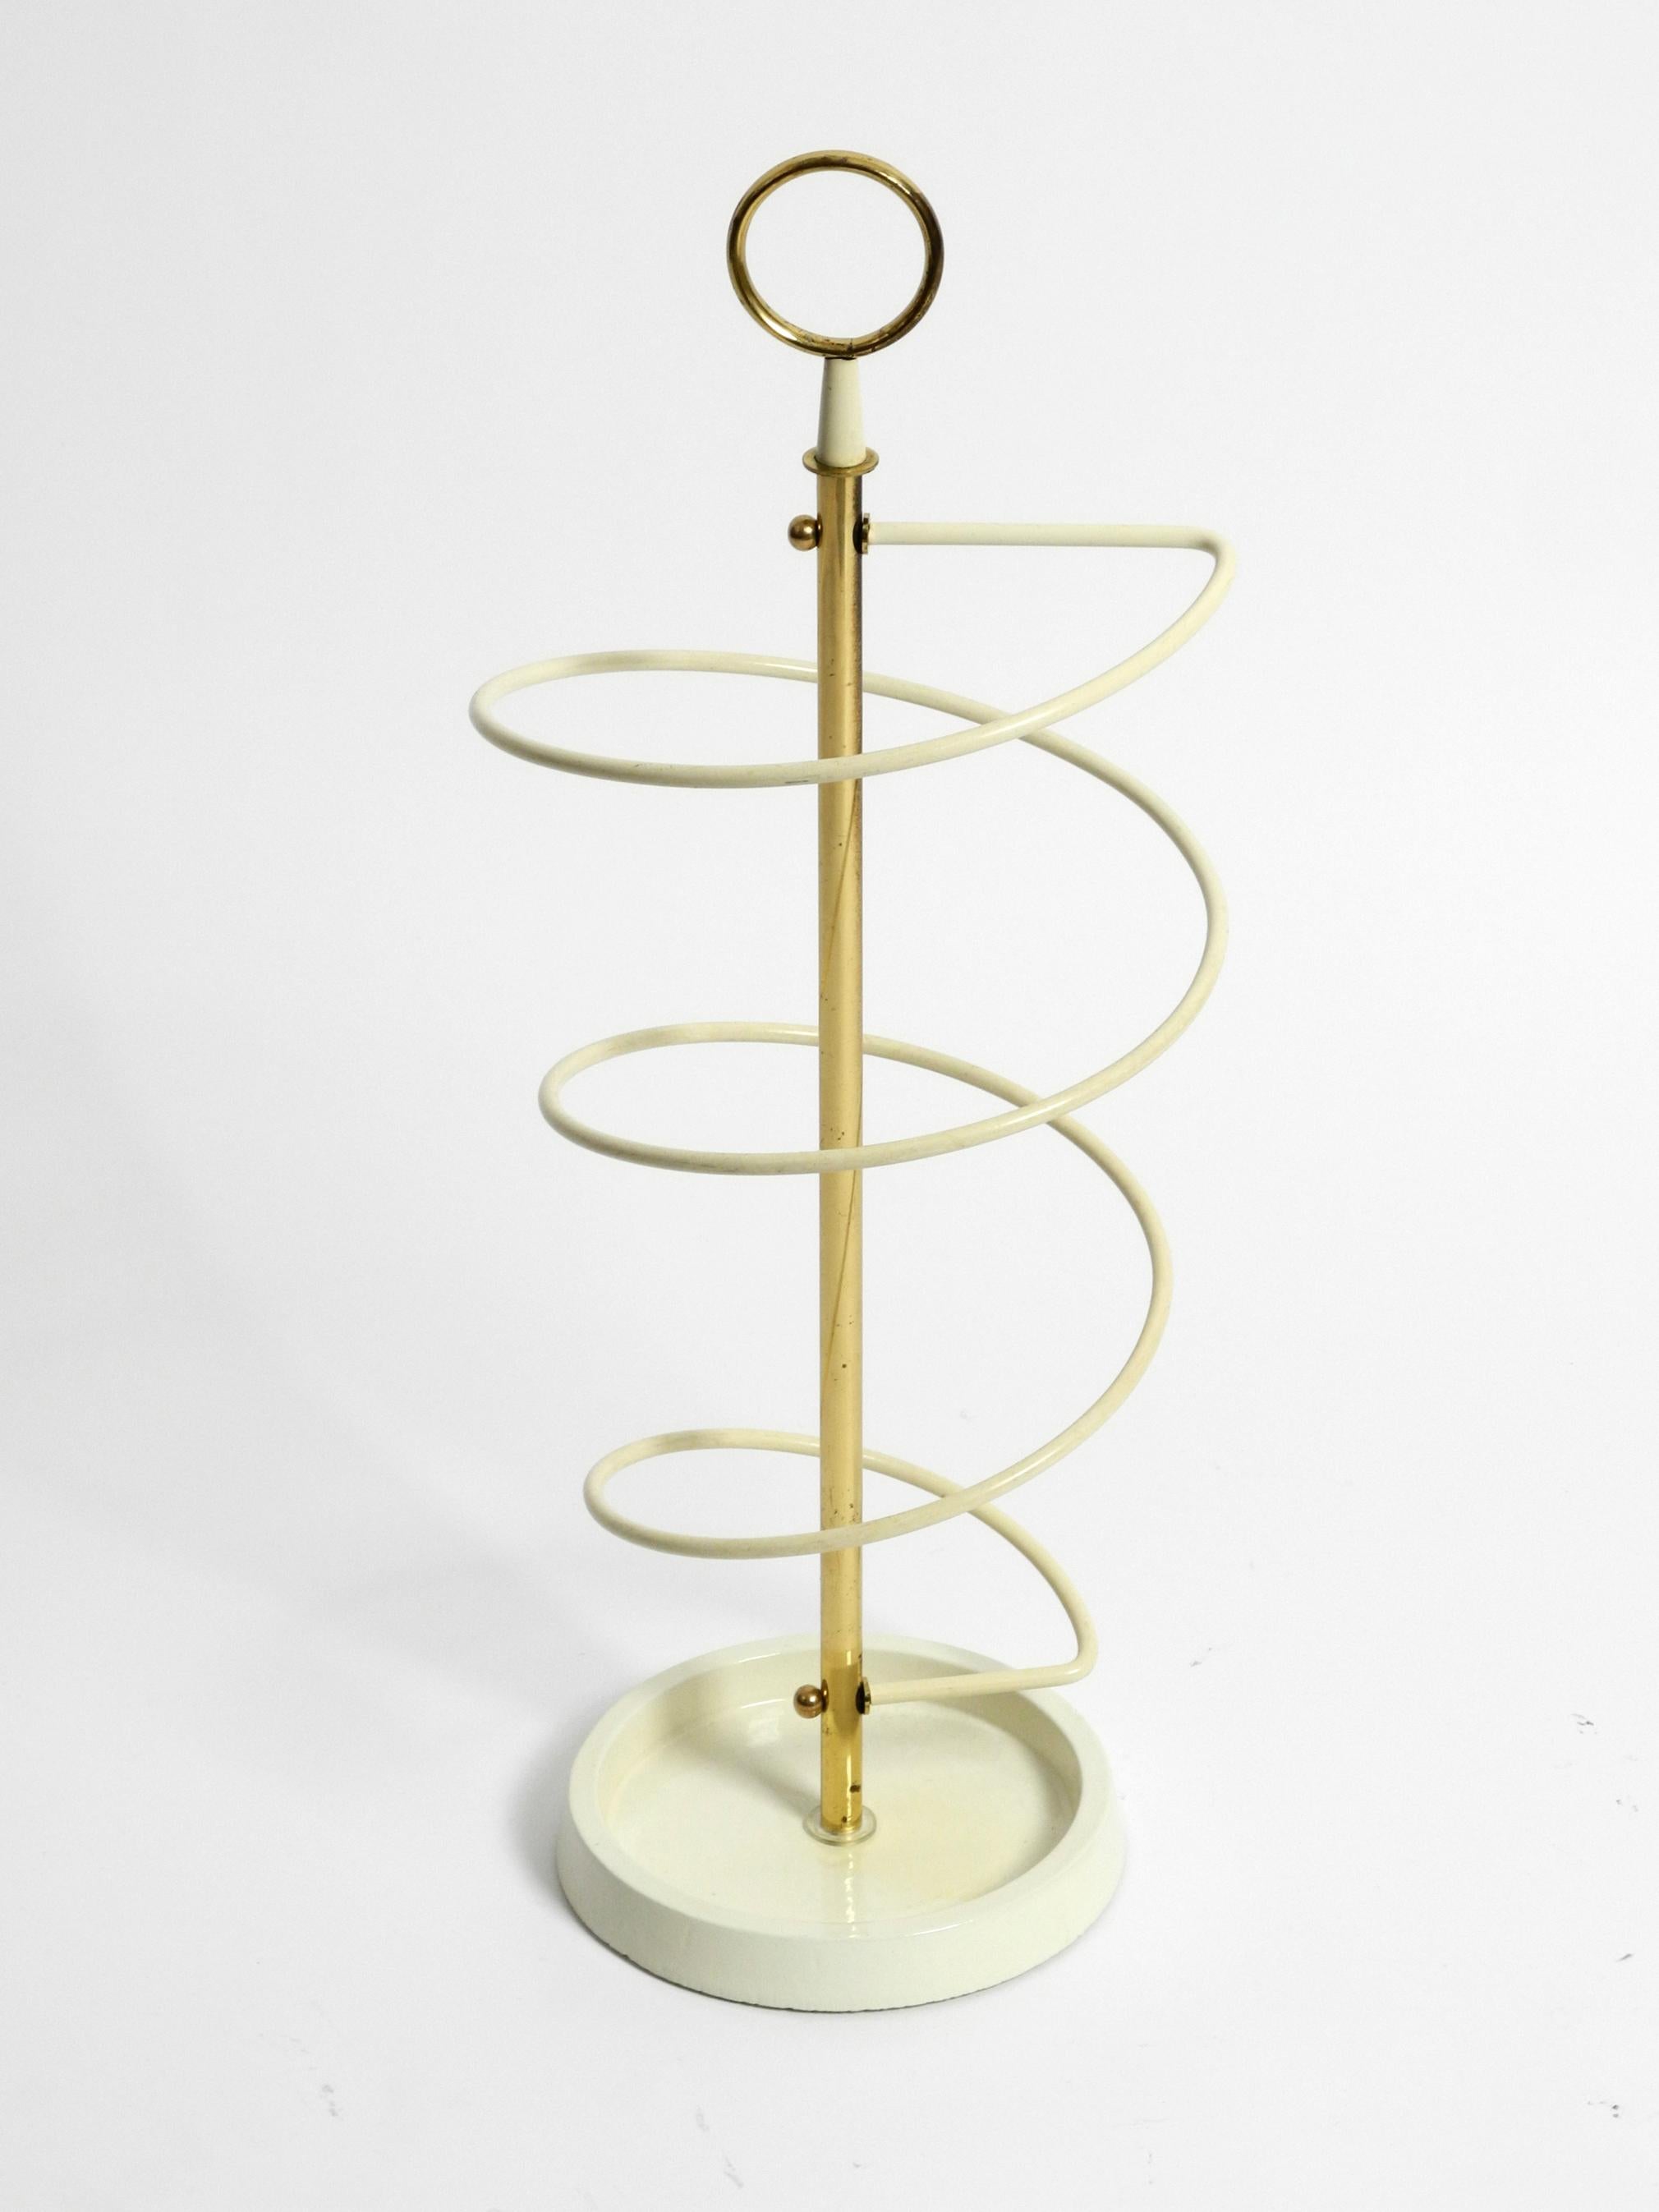 Extraordinary Rare Mid-Century Modern Umbrella Stand in String Helix Design For Sale 6